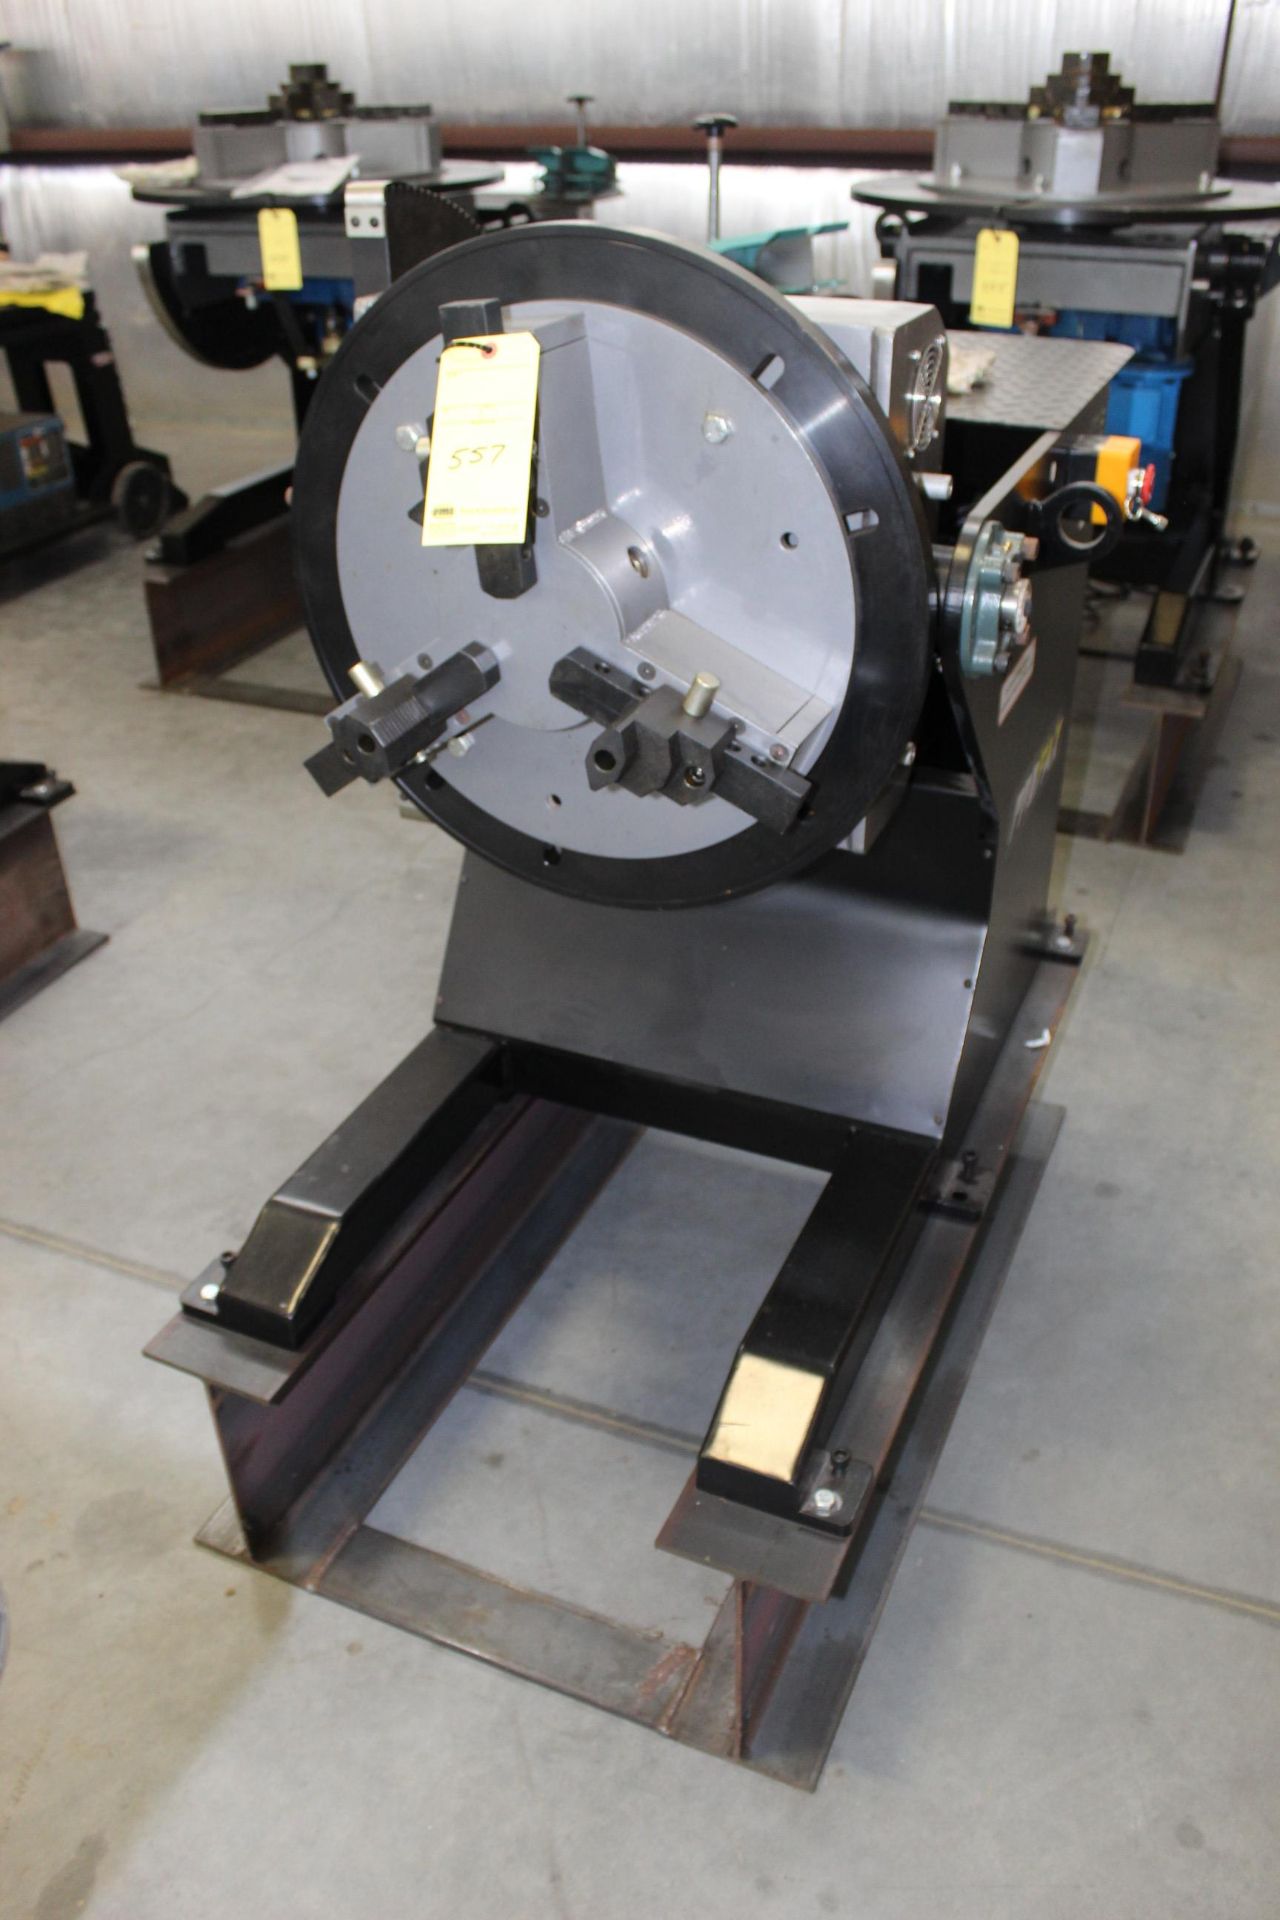 WELDING POSITIONER, PROFAX MDL. WP-1000, 1,000 lb. cap., 3-jaw chuck, on fabricated stand, S/N